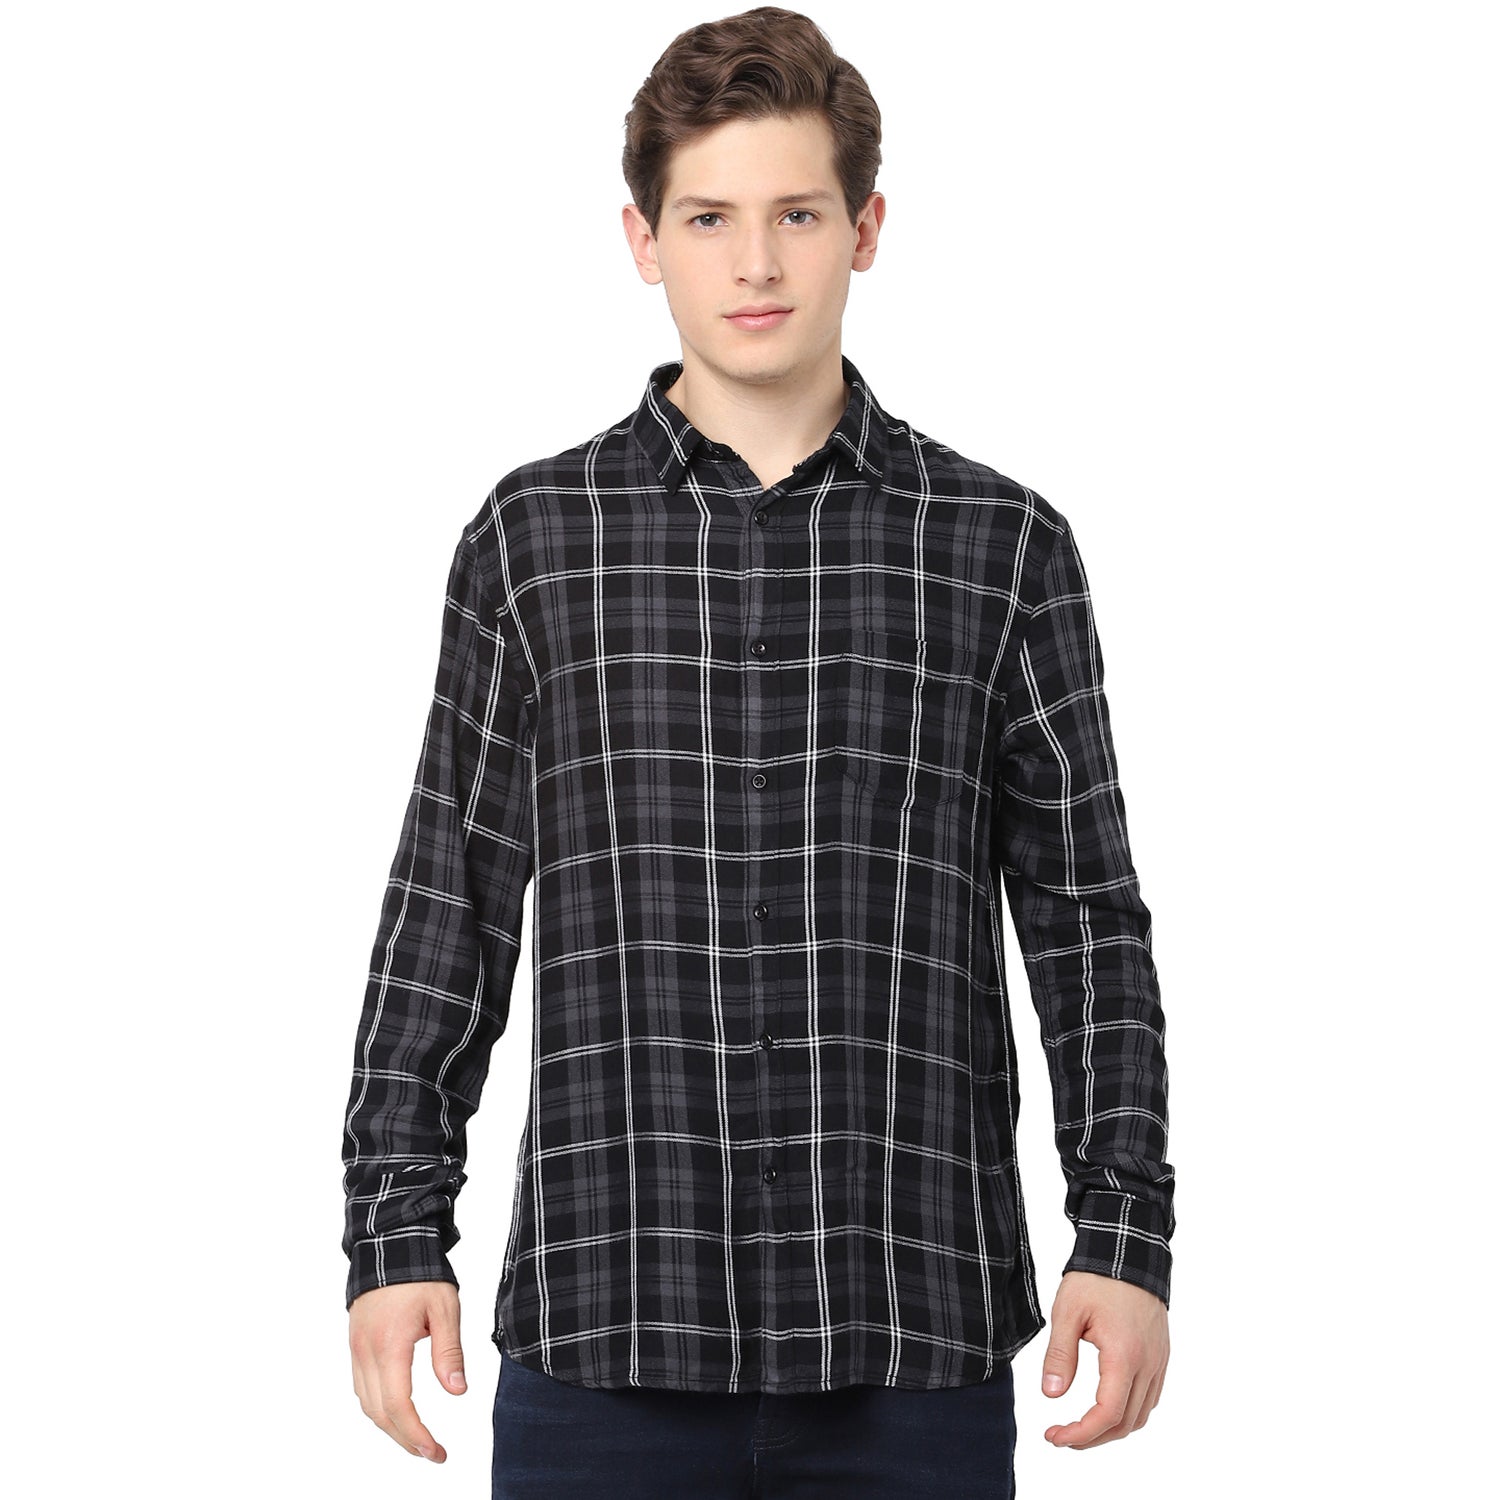 Black and White Long Sleeves Checked Casual Shirt (BAVISQUARE)